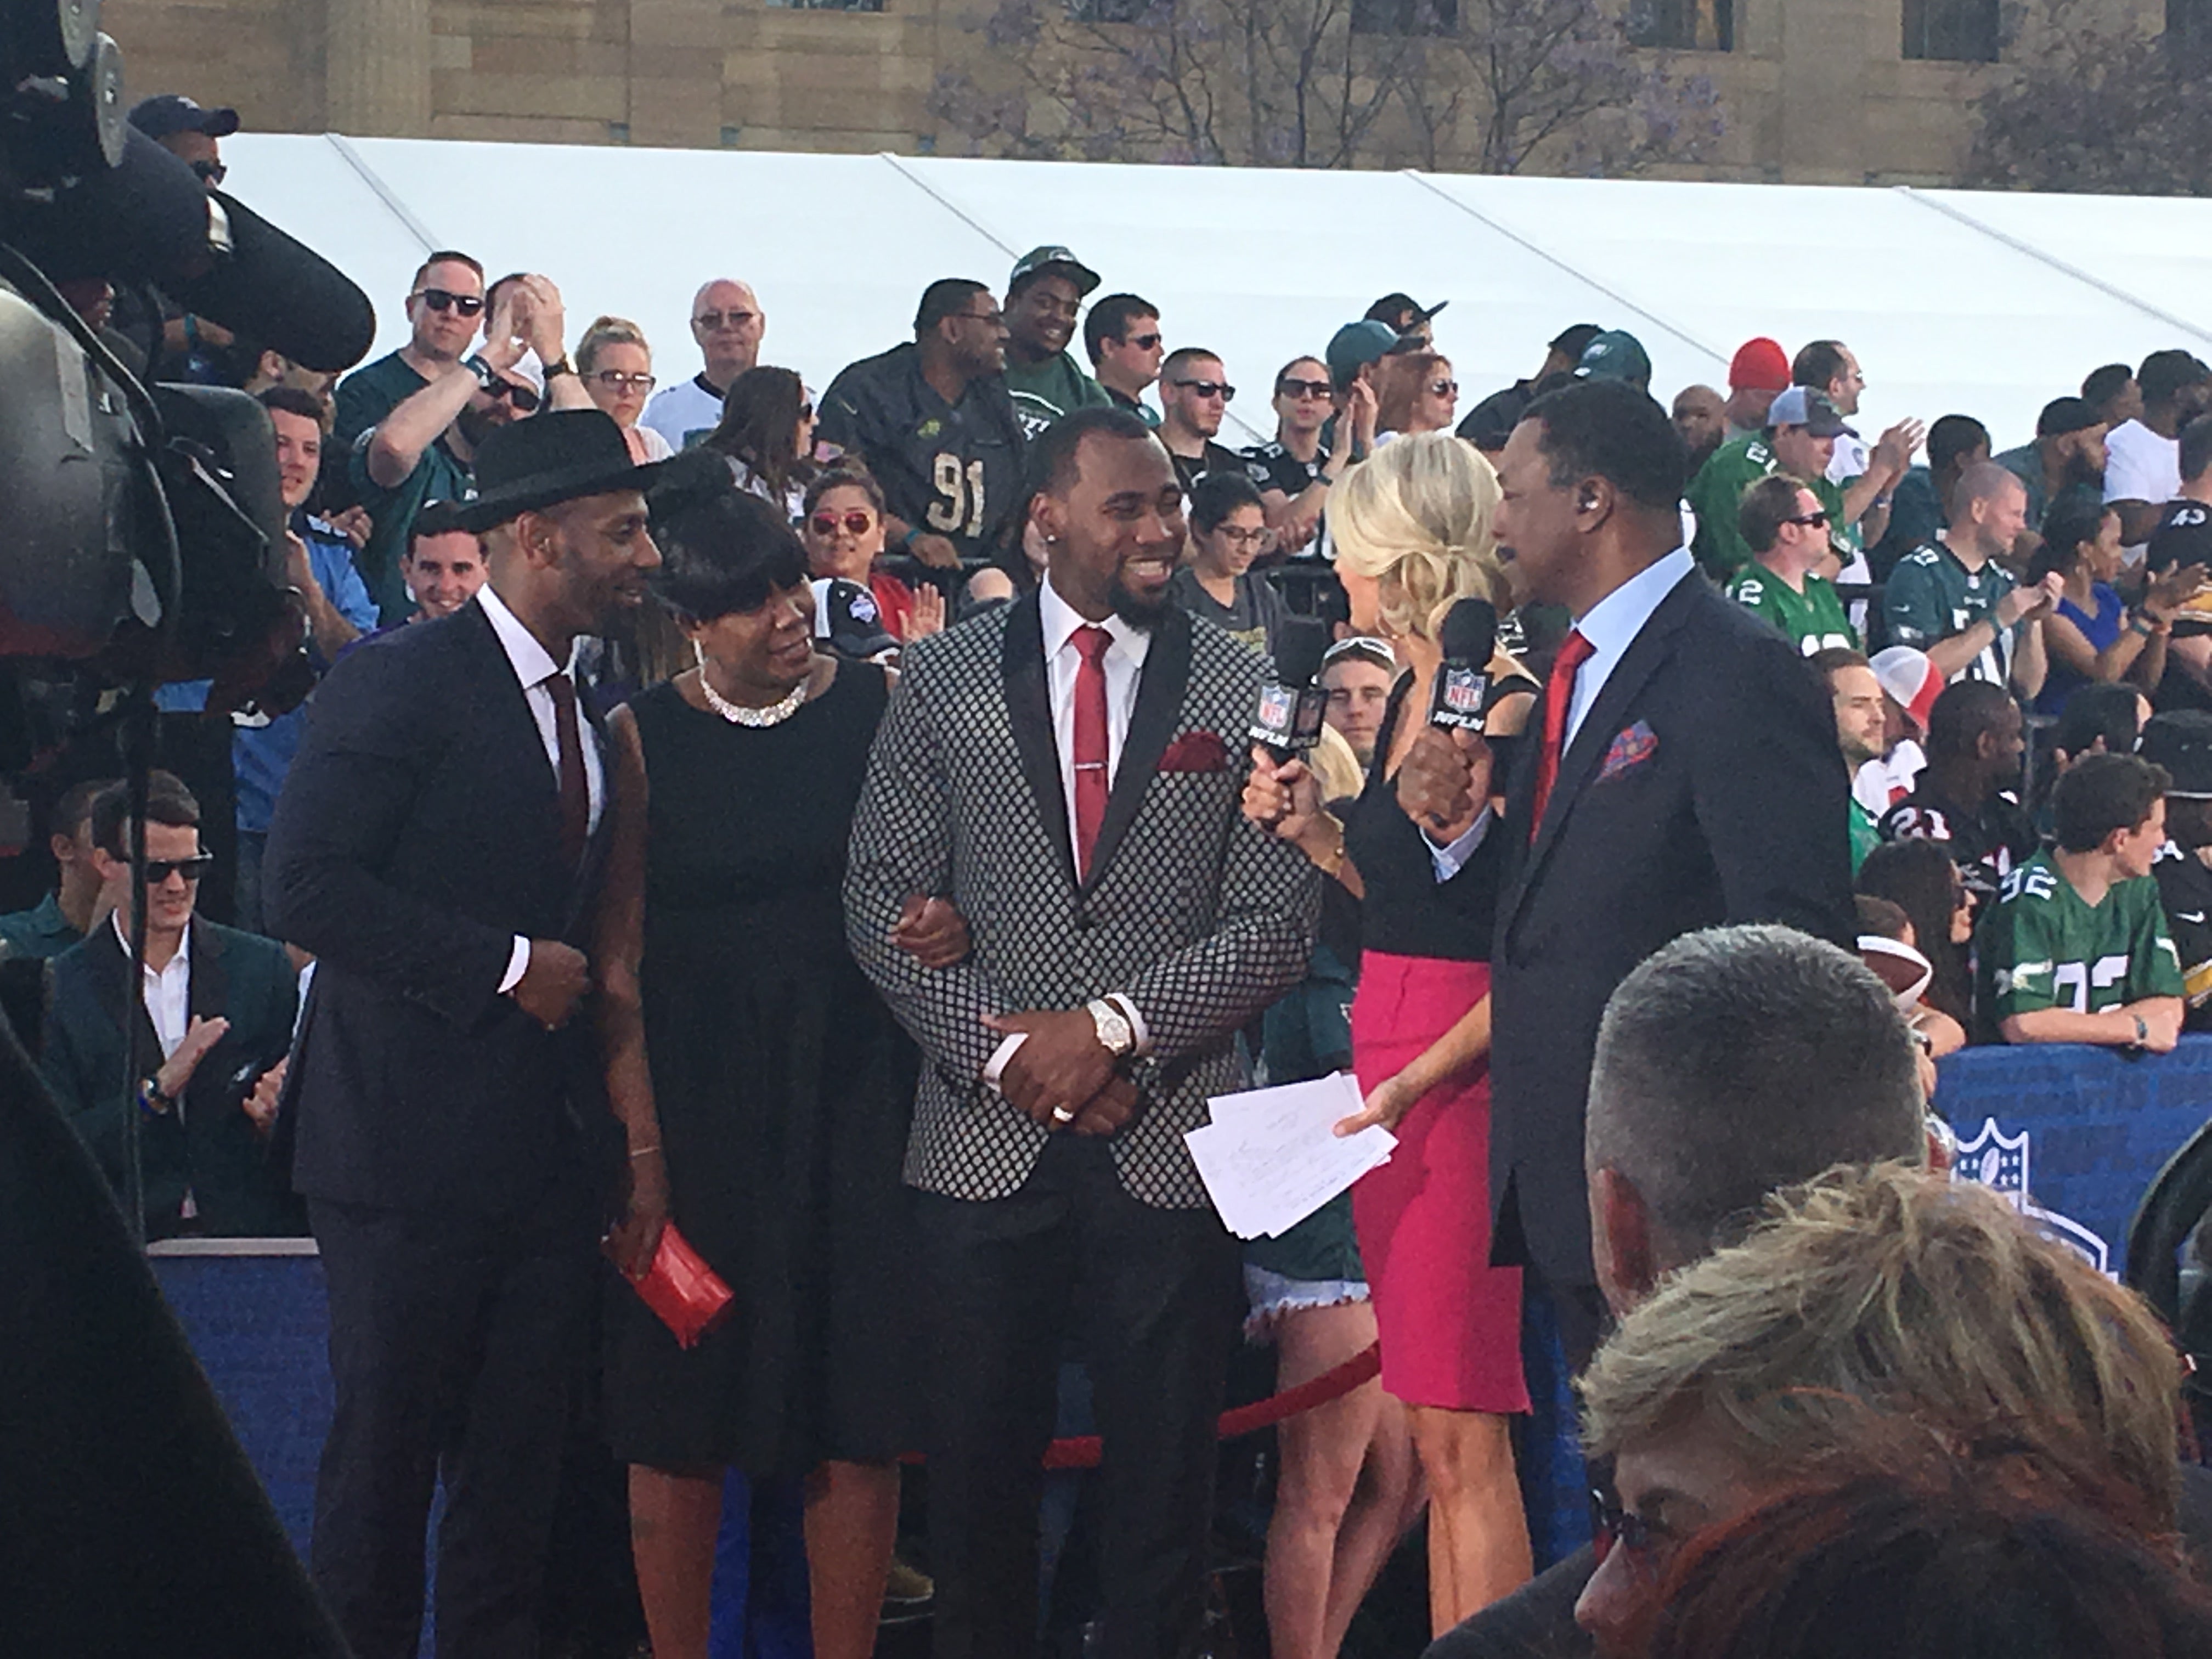  Haason Reddick, a Camden native and standout at Temple, is interviewed by the NFL Network's Melissa Stark and actor Carl Weathers prior to the first round of the NFL Draft. (Jay Scott Smith/WHYY)  